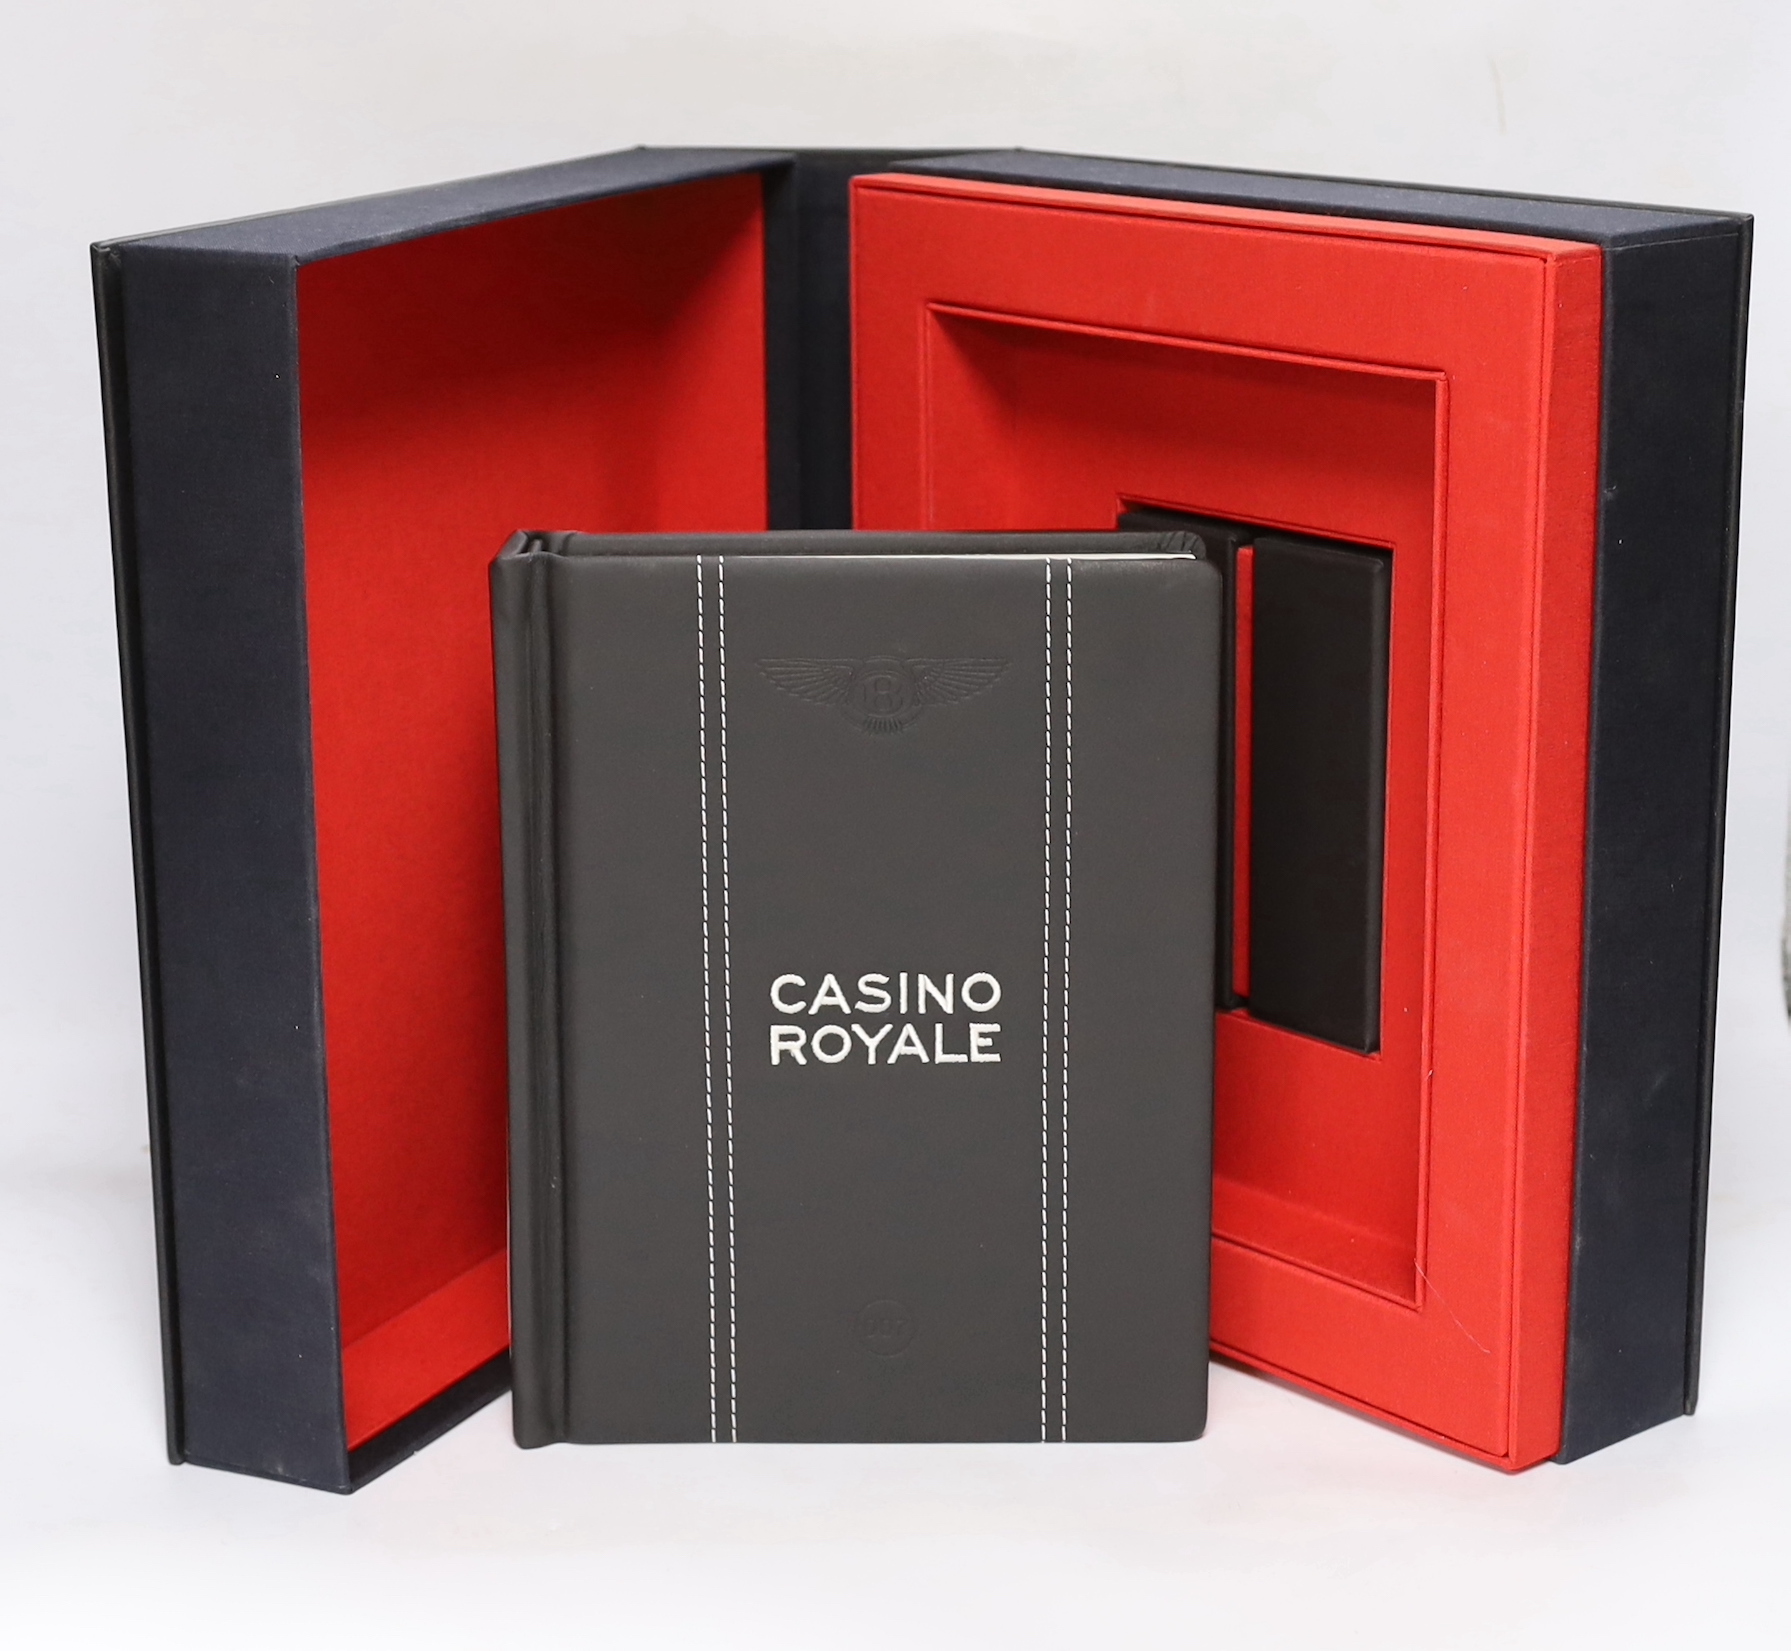 Fleming, Ian - Casino Royale, Vintage Special Series 512, by Bentley Motors Ltd., the black leather binding blind stamped with the Bentley logo, Vintage Books, London 2013, the clam shell case incorporating two sets of b